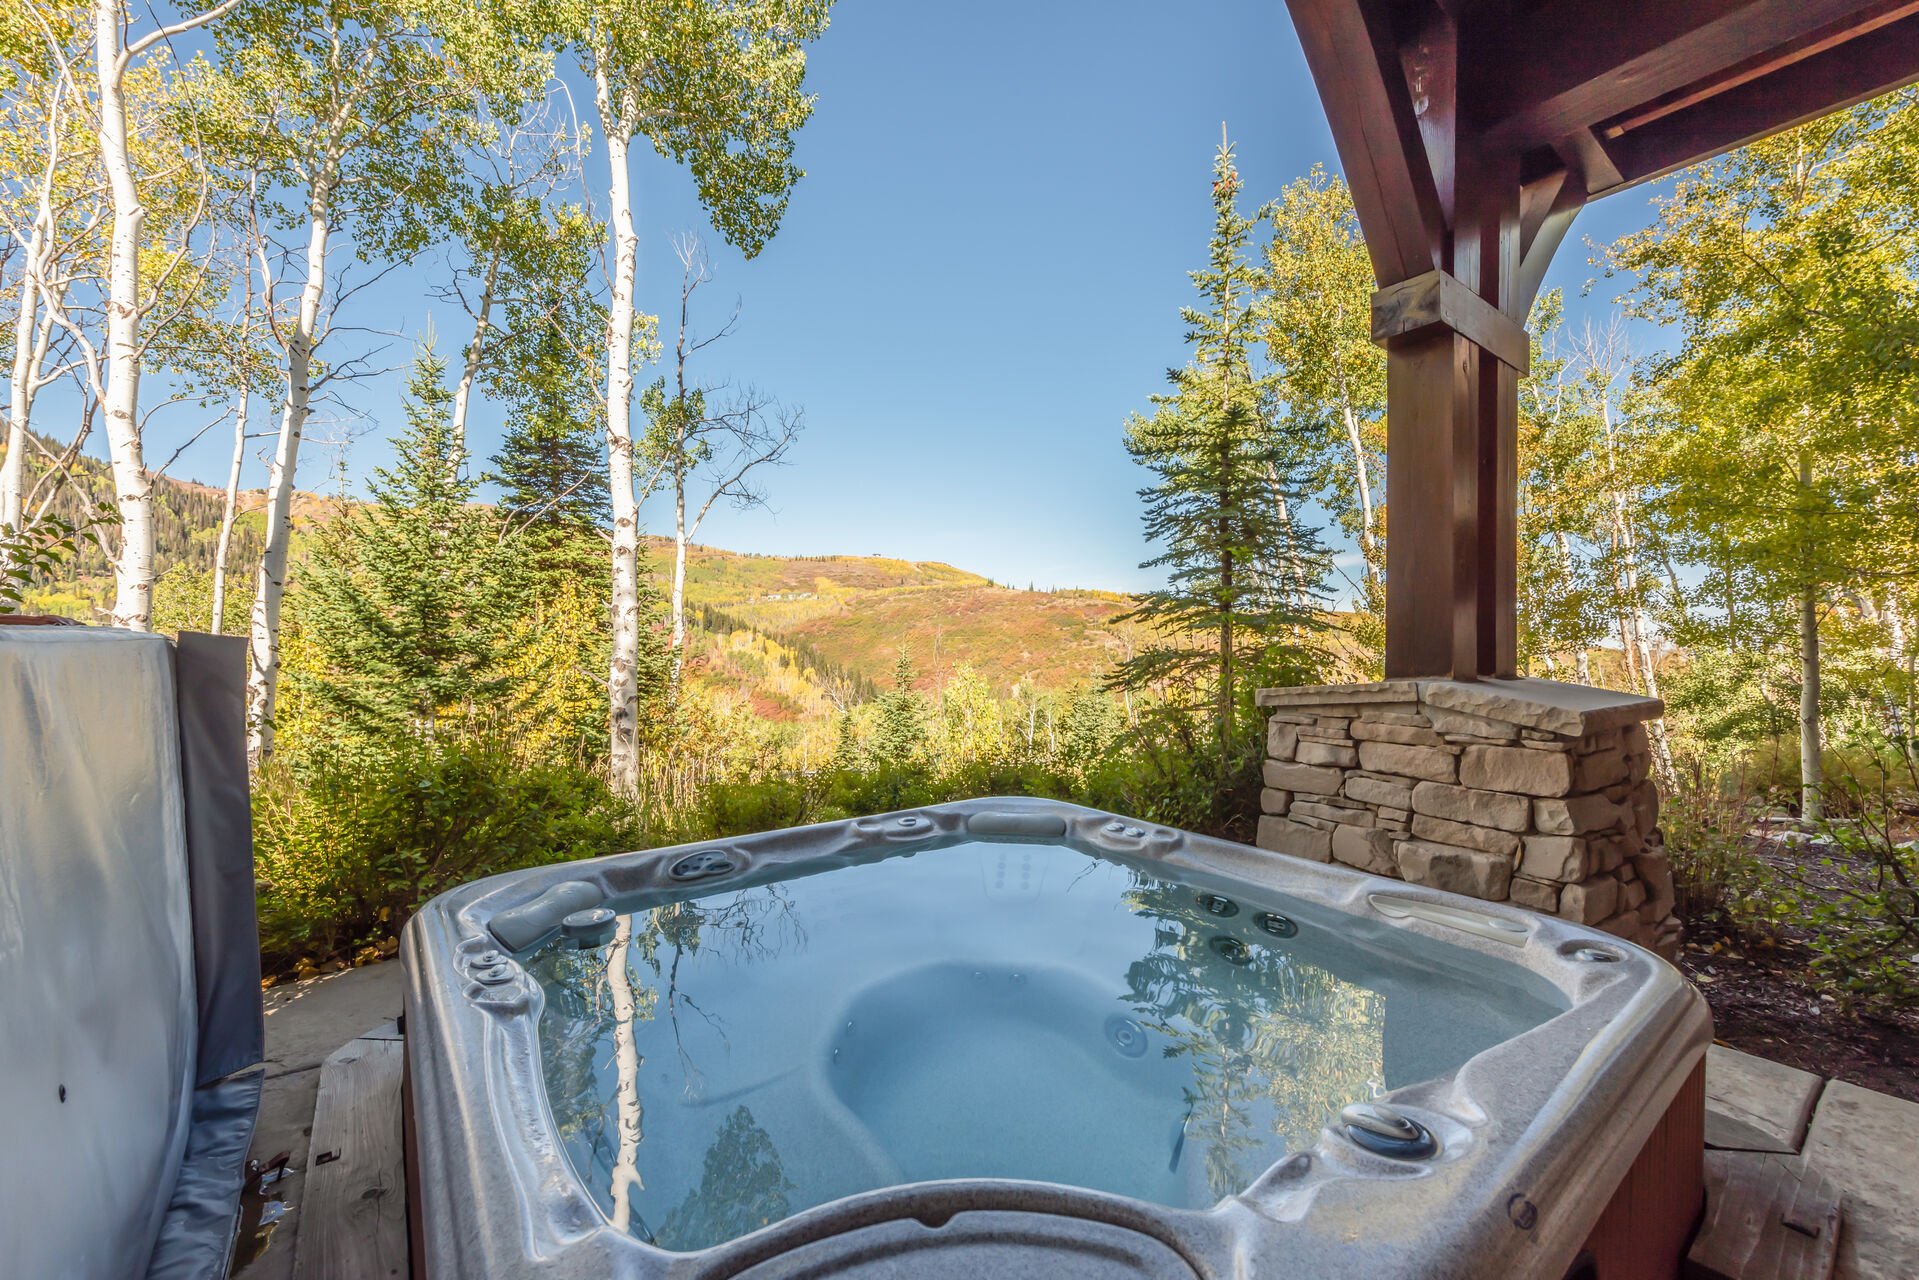 Private Hot Tub with Mountain Views